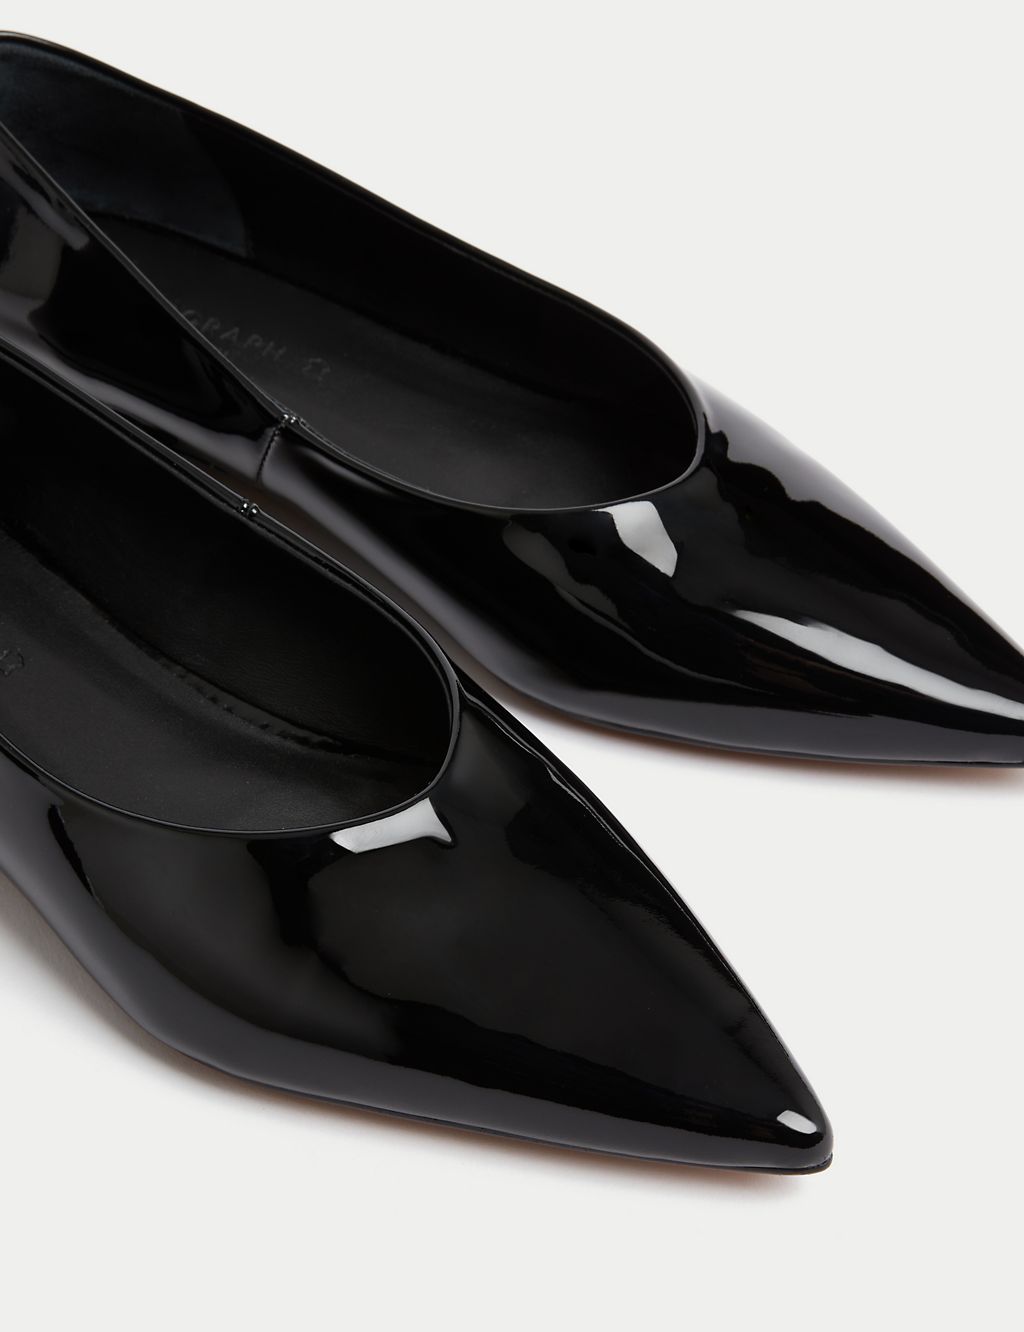 Patent Flat Pointed Pumps 2 of 3